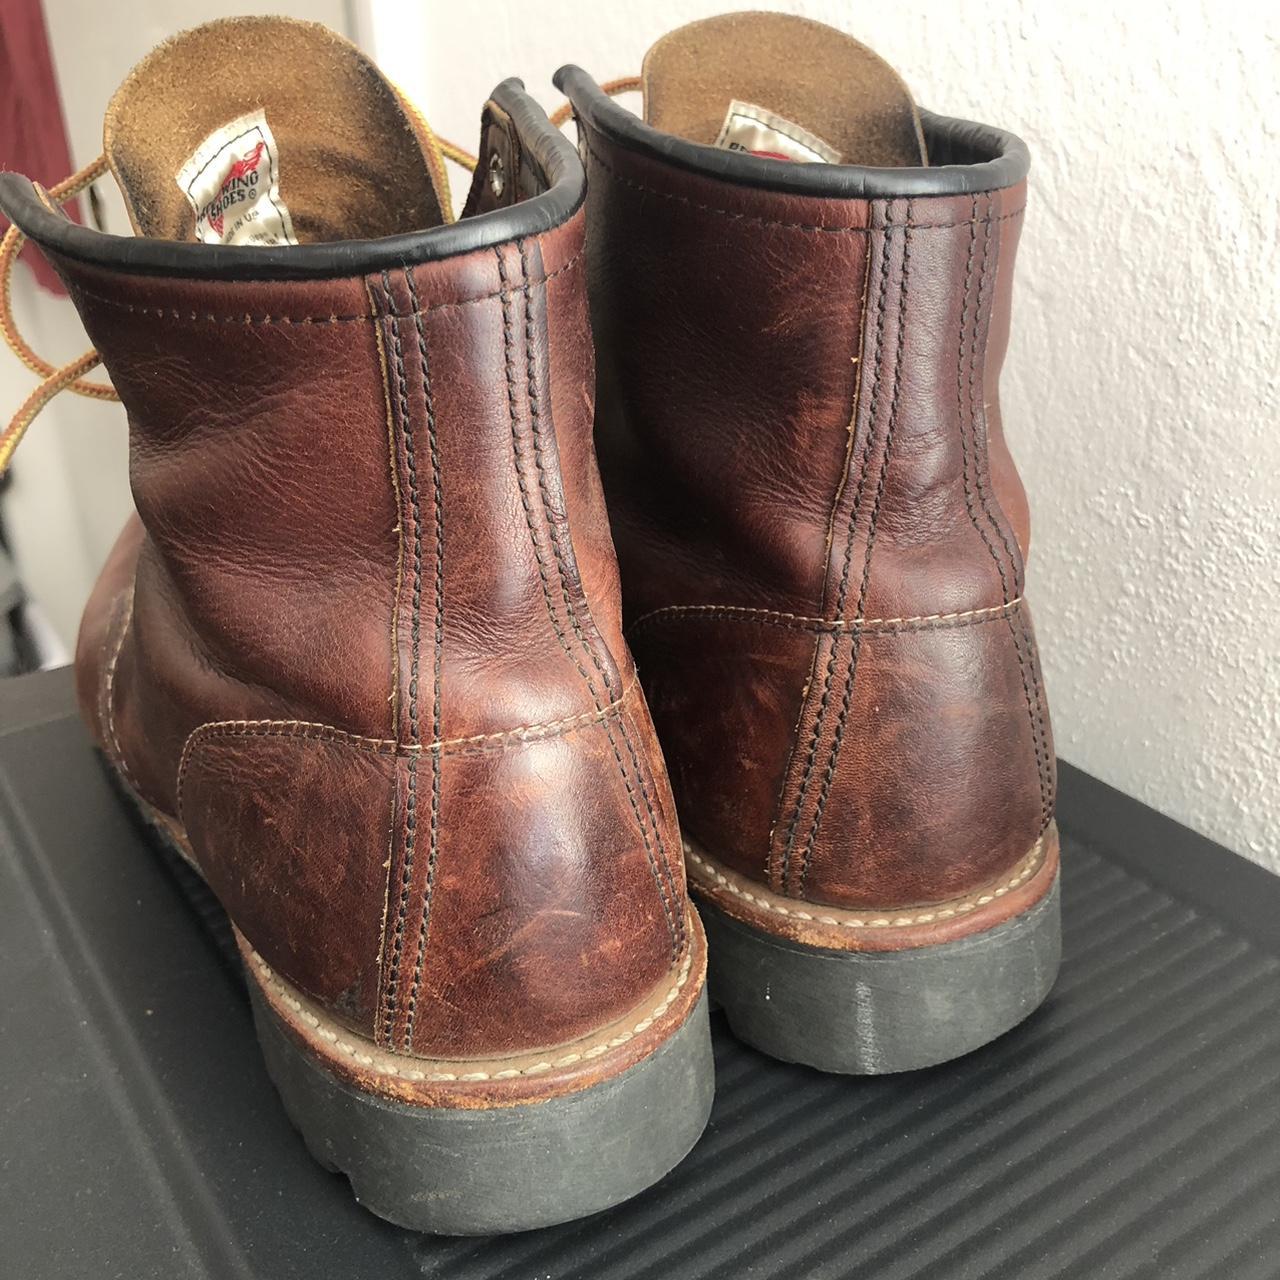 Redwing Men's Burgundy and Brown Boots (2)